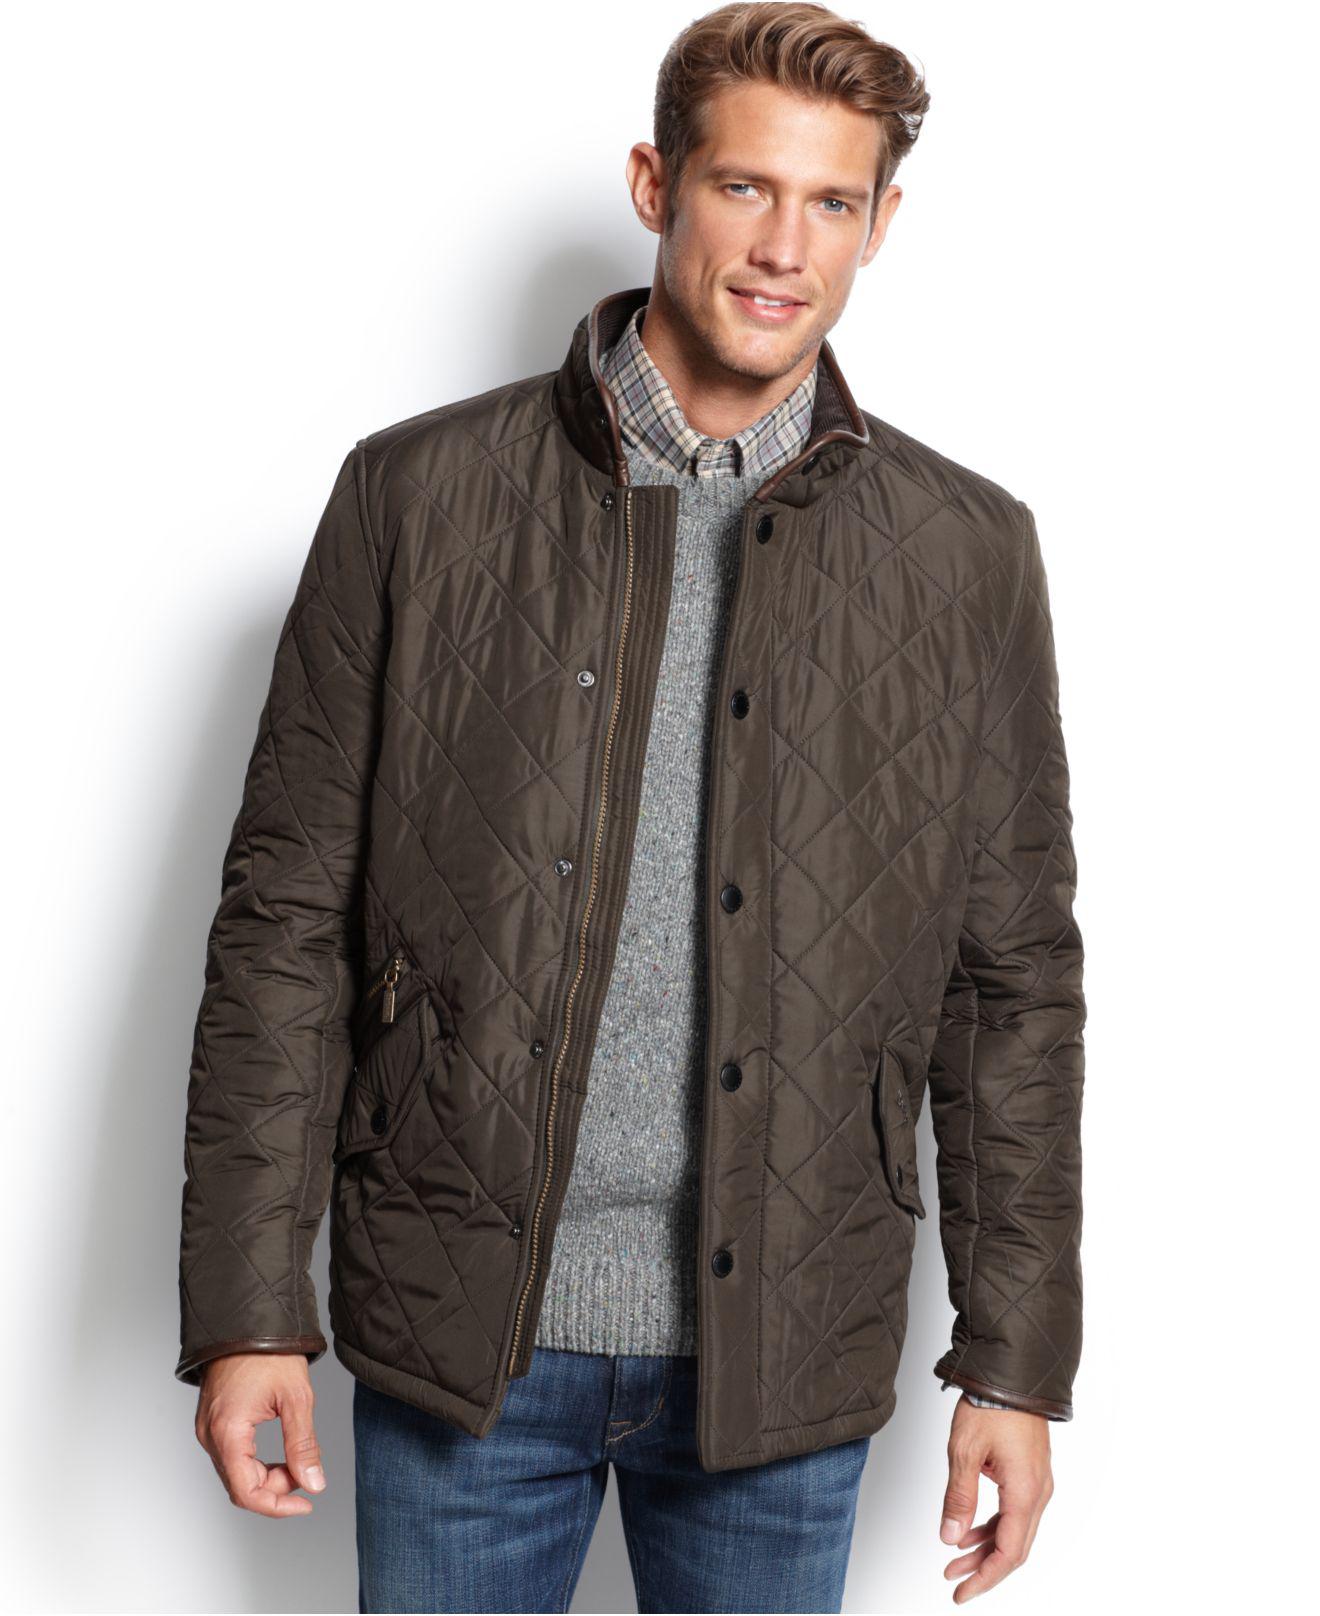 Barbour Corduroy Powell Quilted Jacket in Olive (Brown) for Men - Lyst